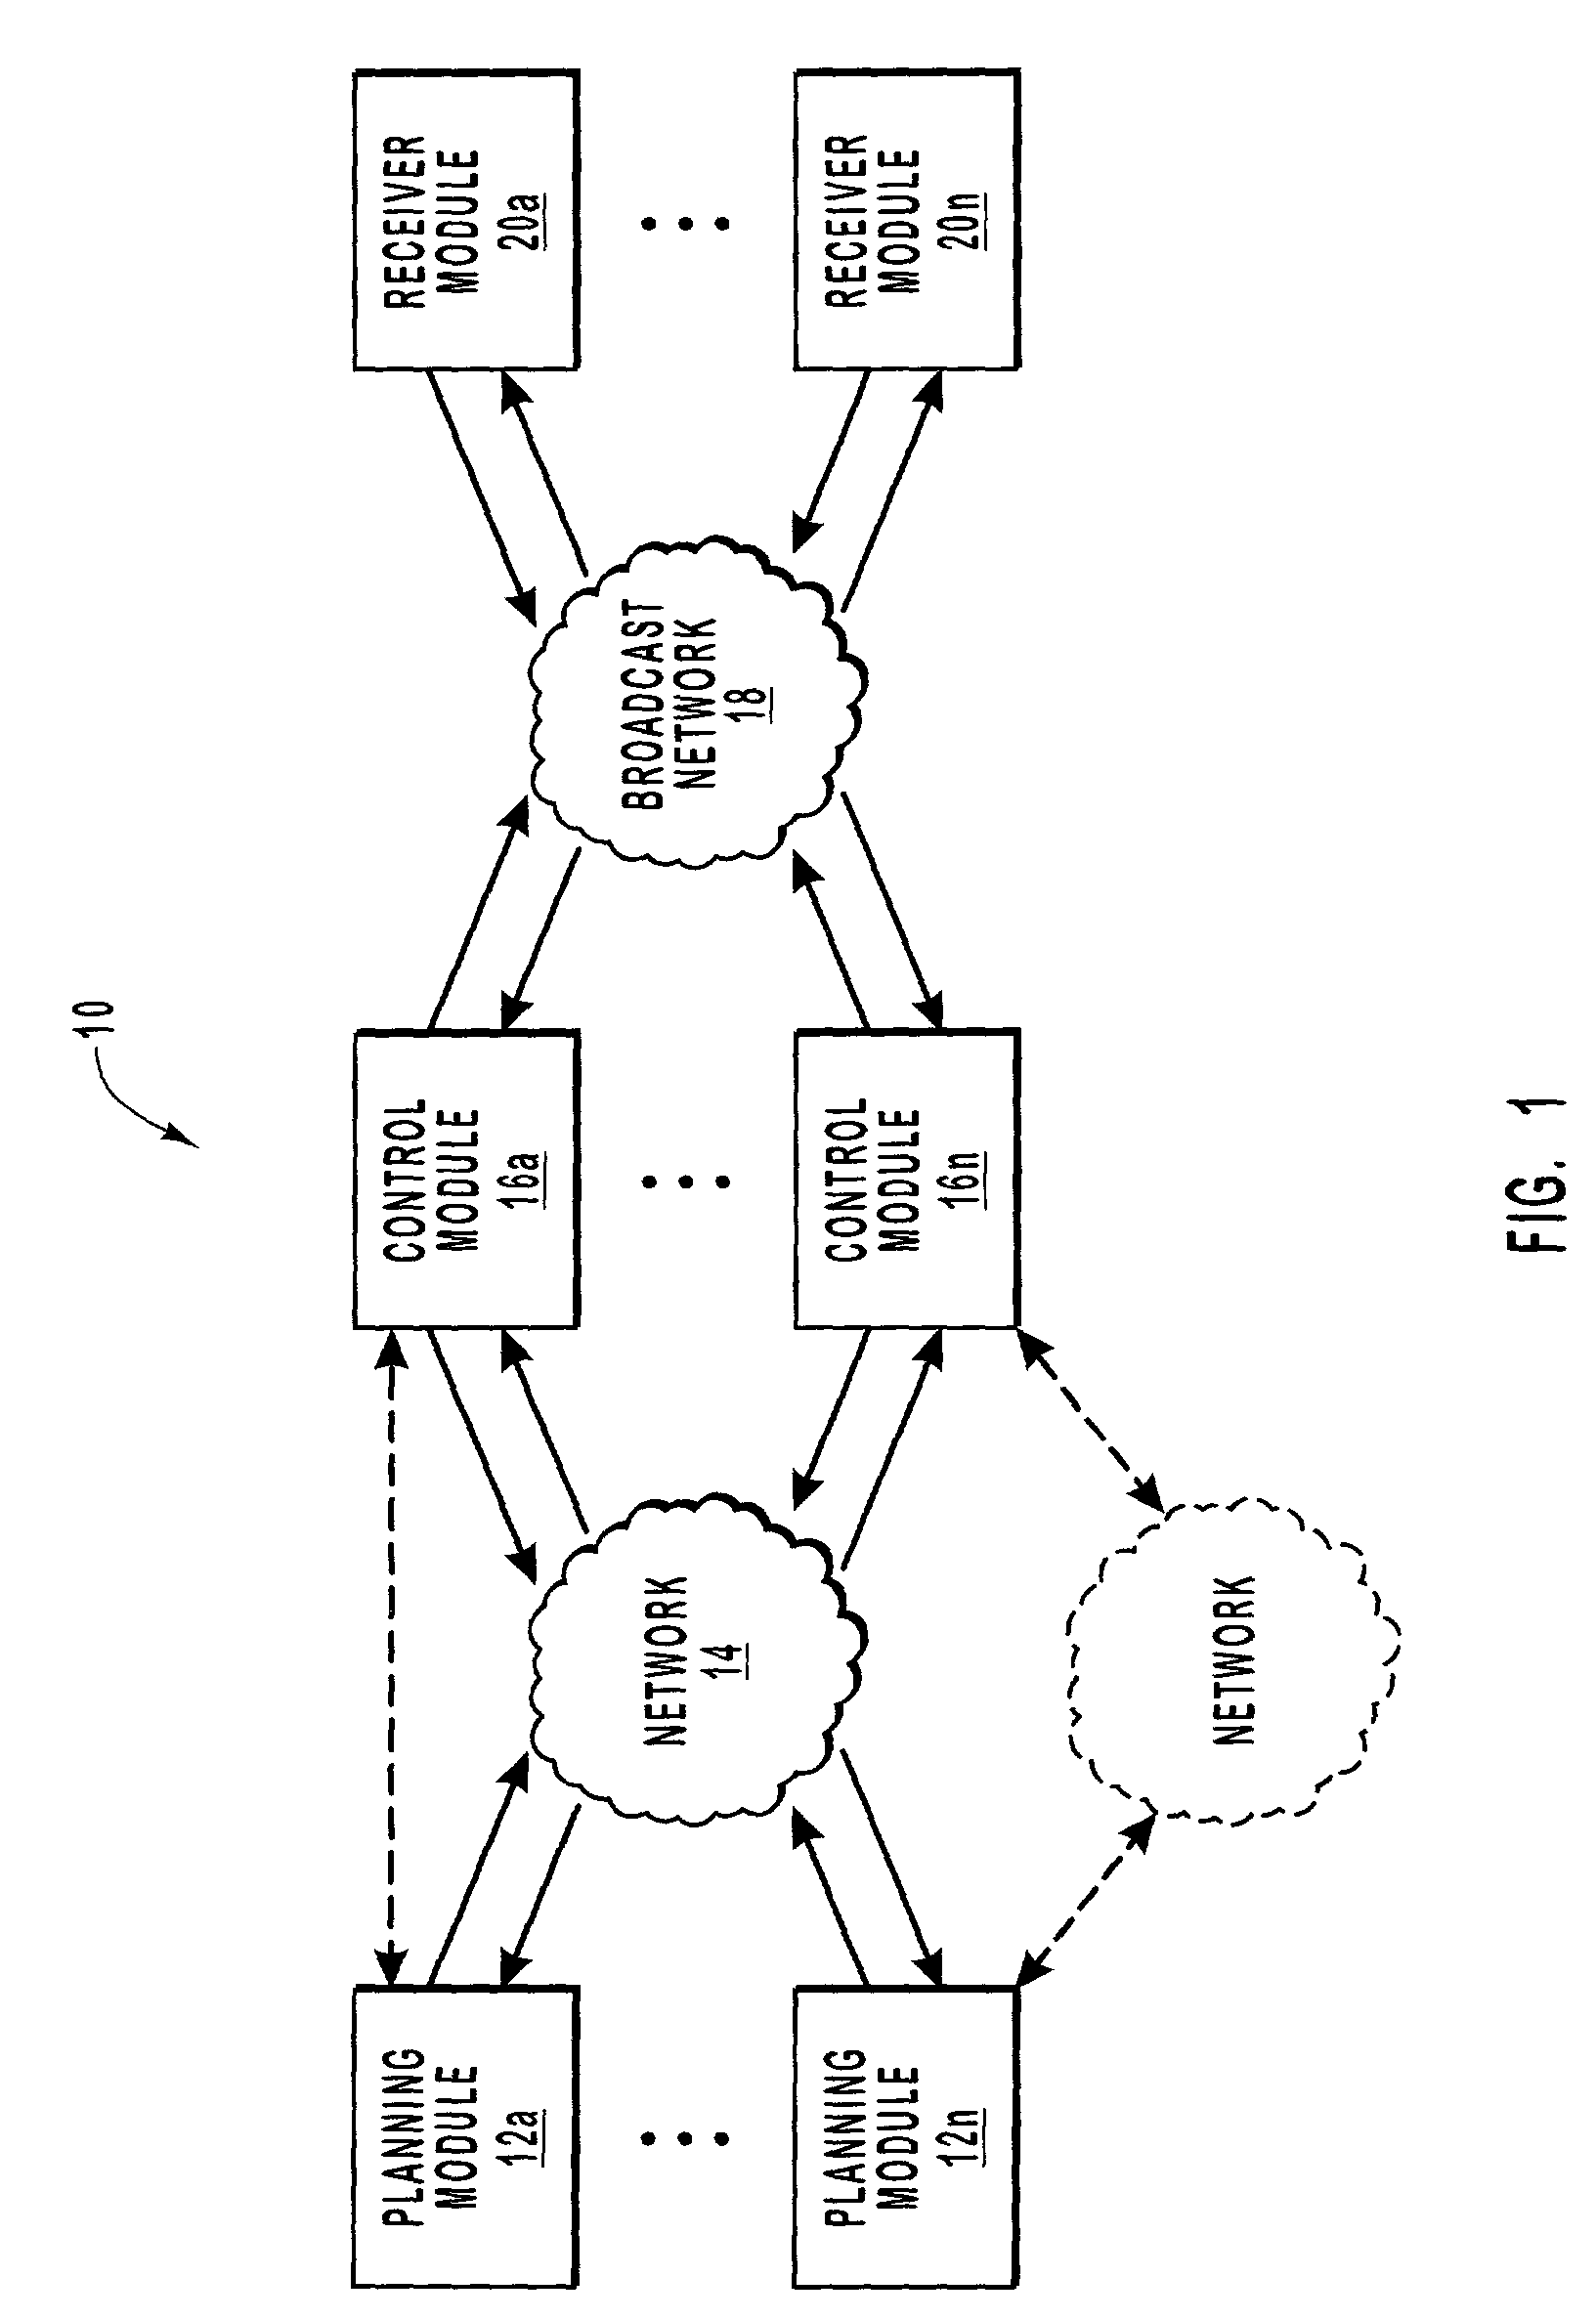 Methods and systems for selectively displaying advertisements